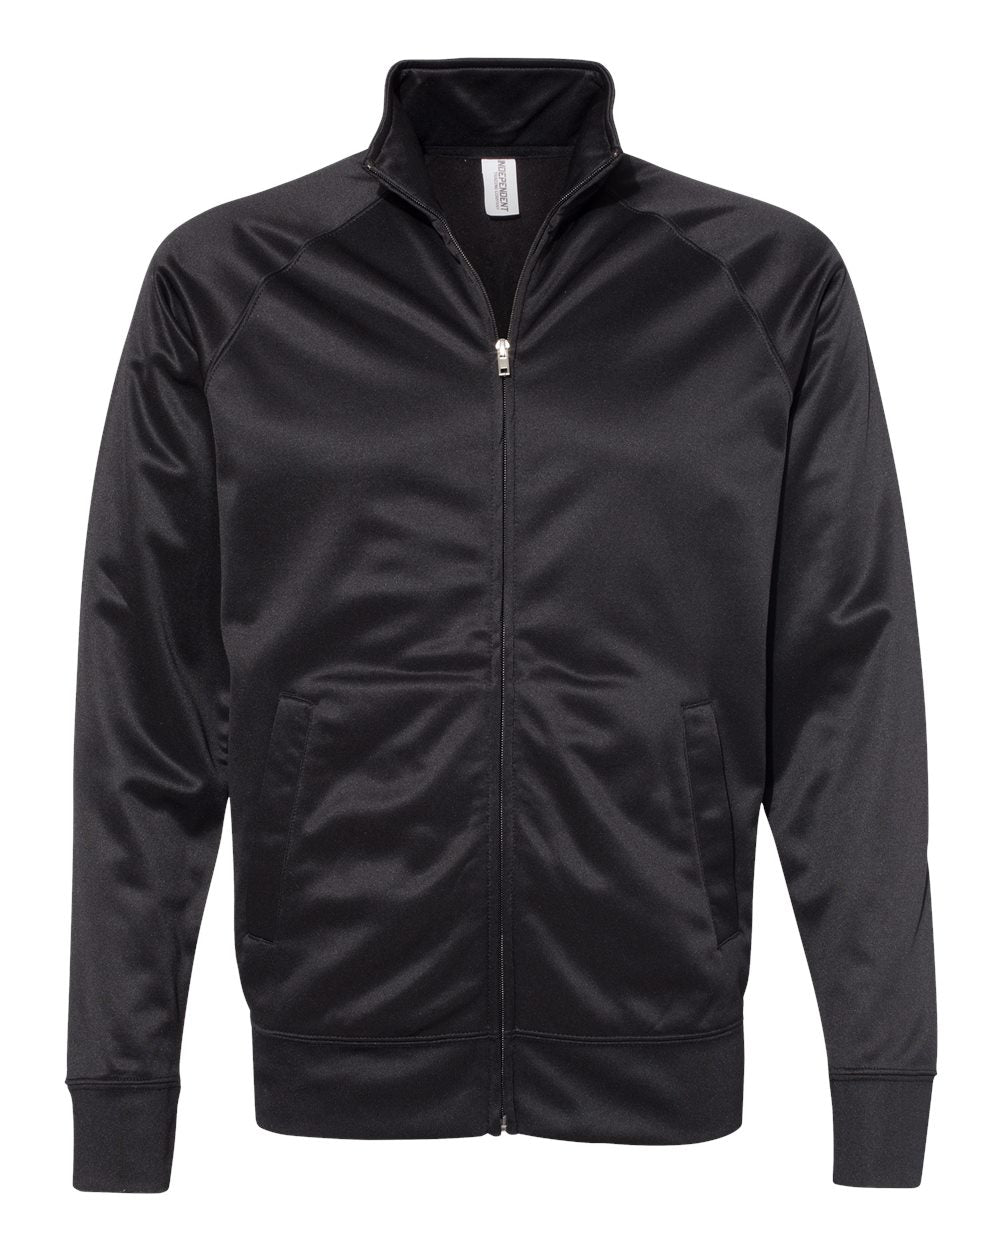 Independent Trading Co. - Lightweight Poly-Tech Full-Zip Track Jacket